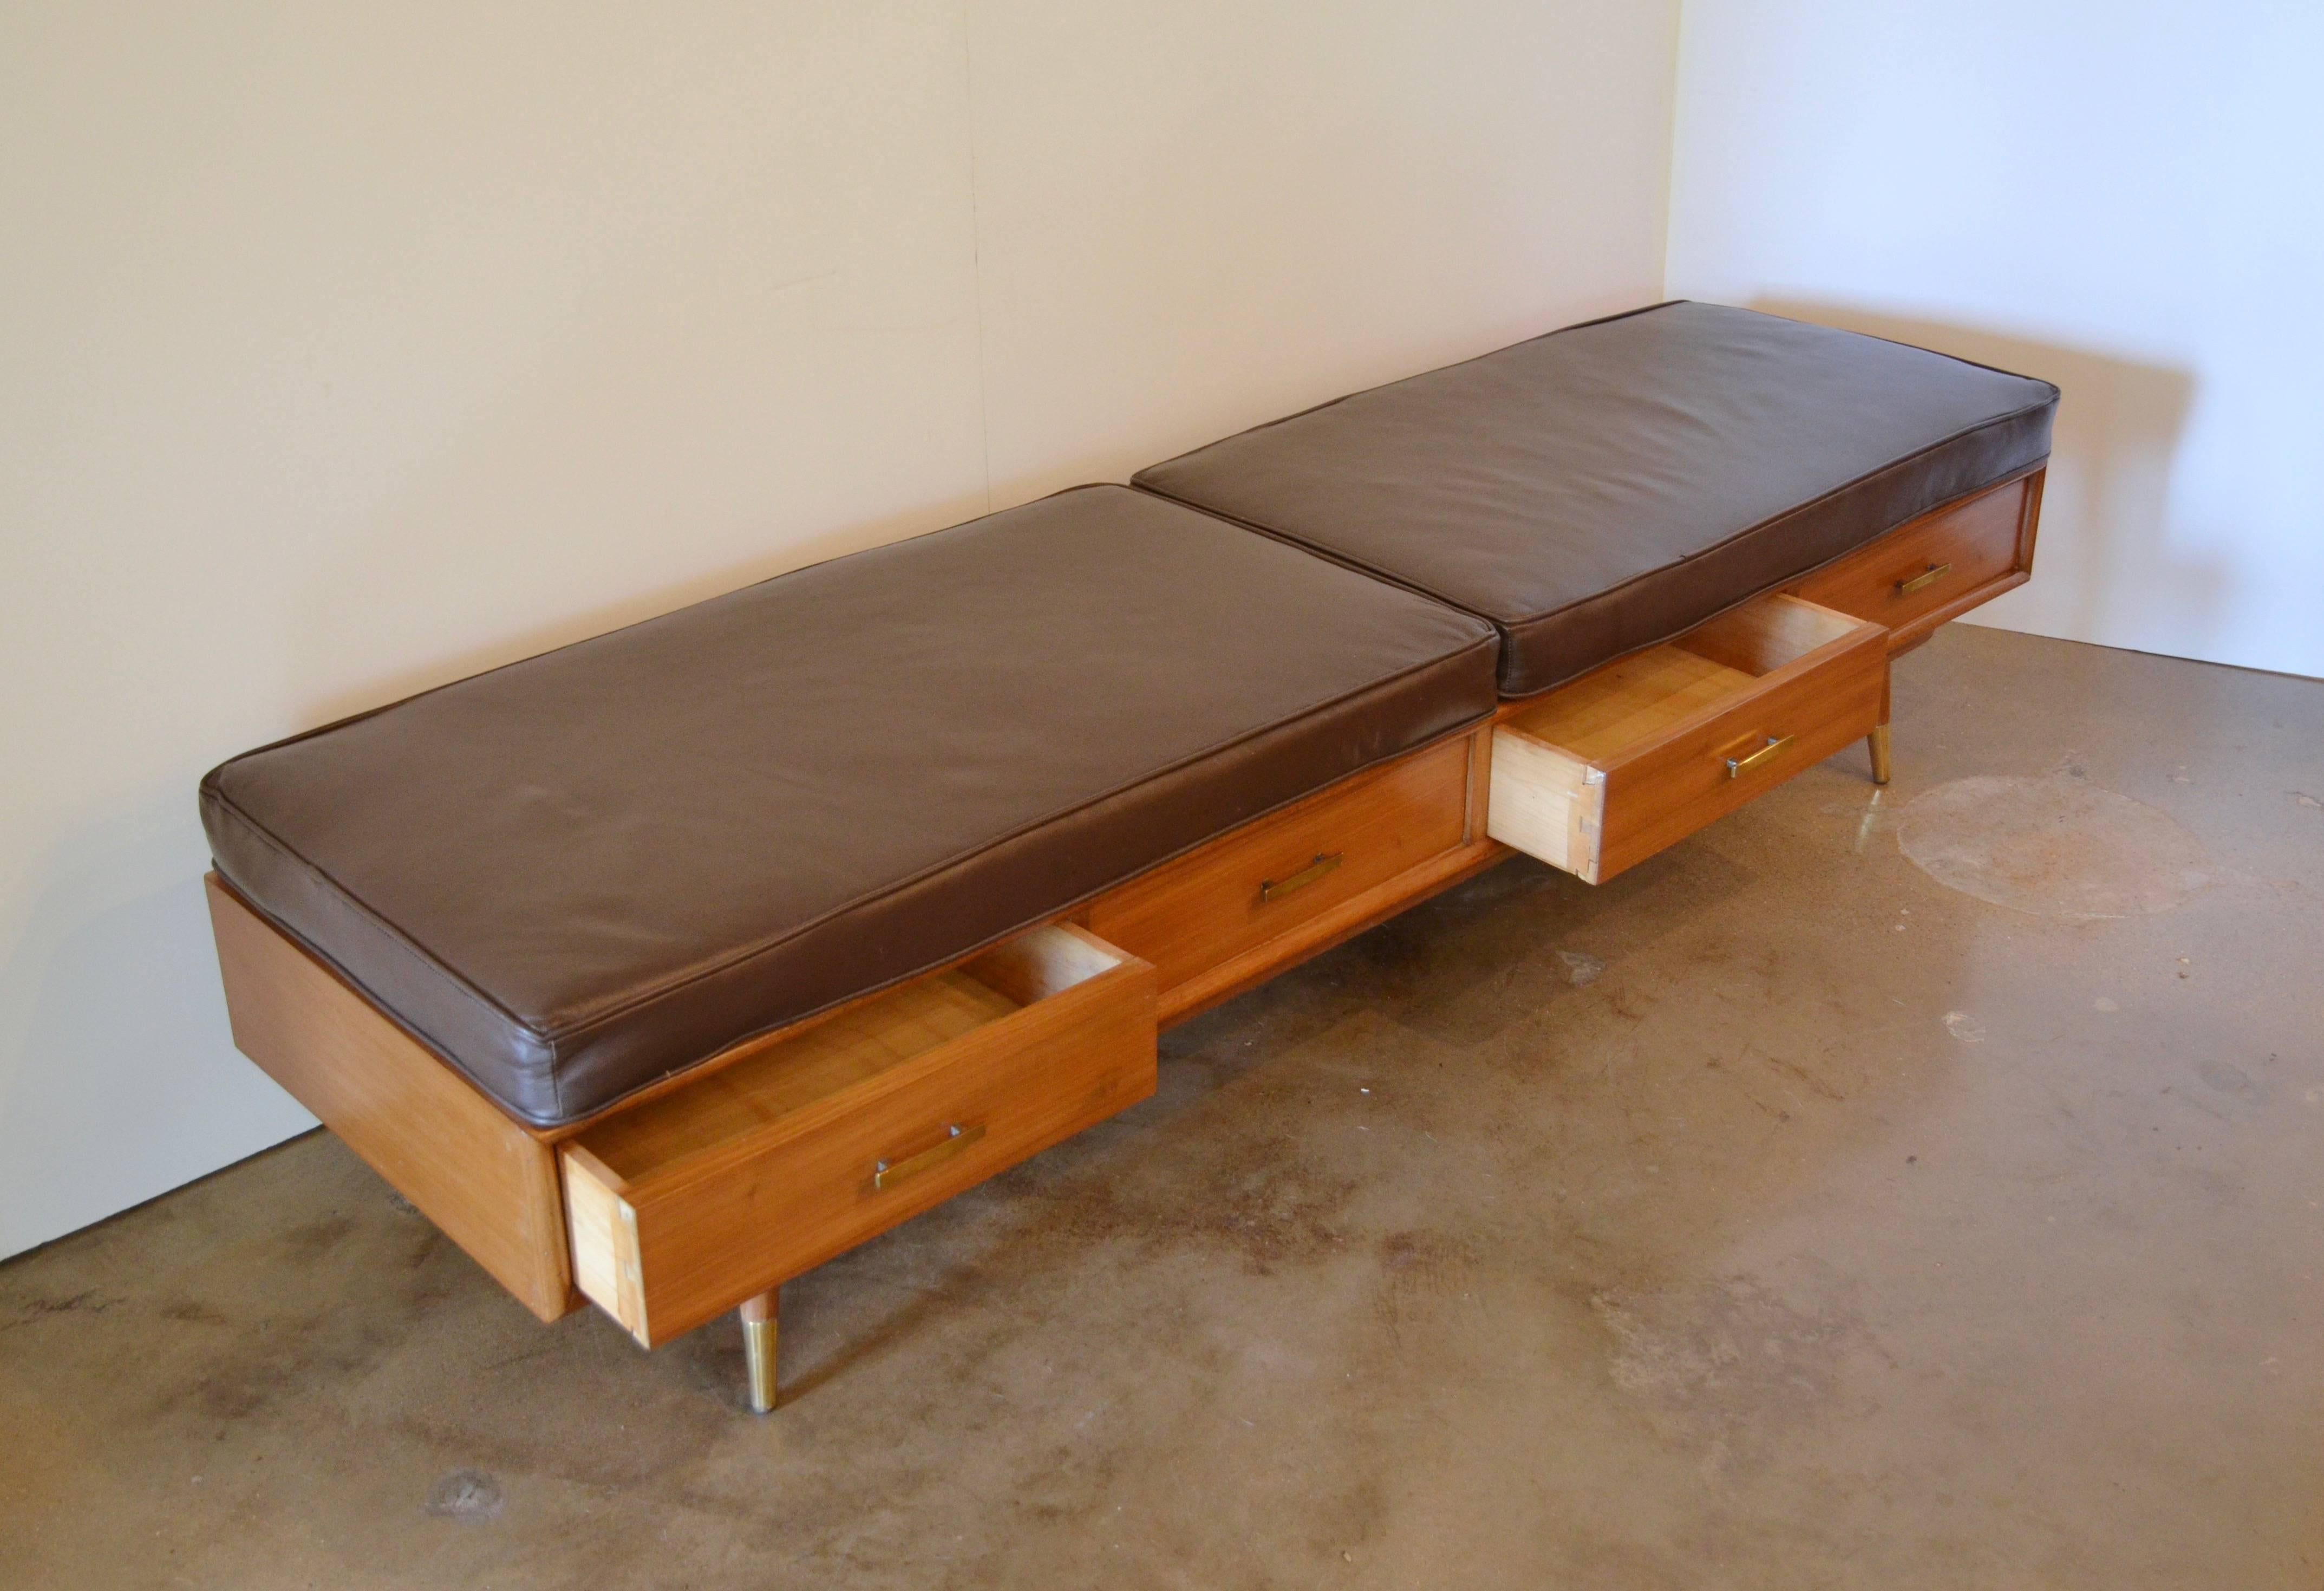 20th Century Mid-Century Bench with Drawers and Leather Cushions